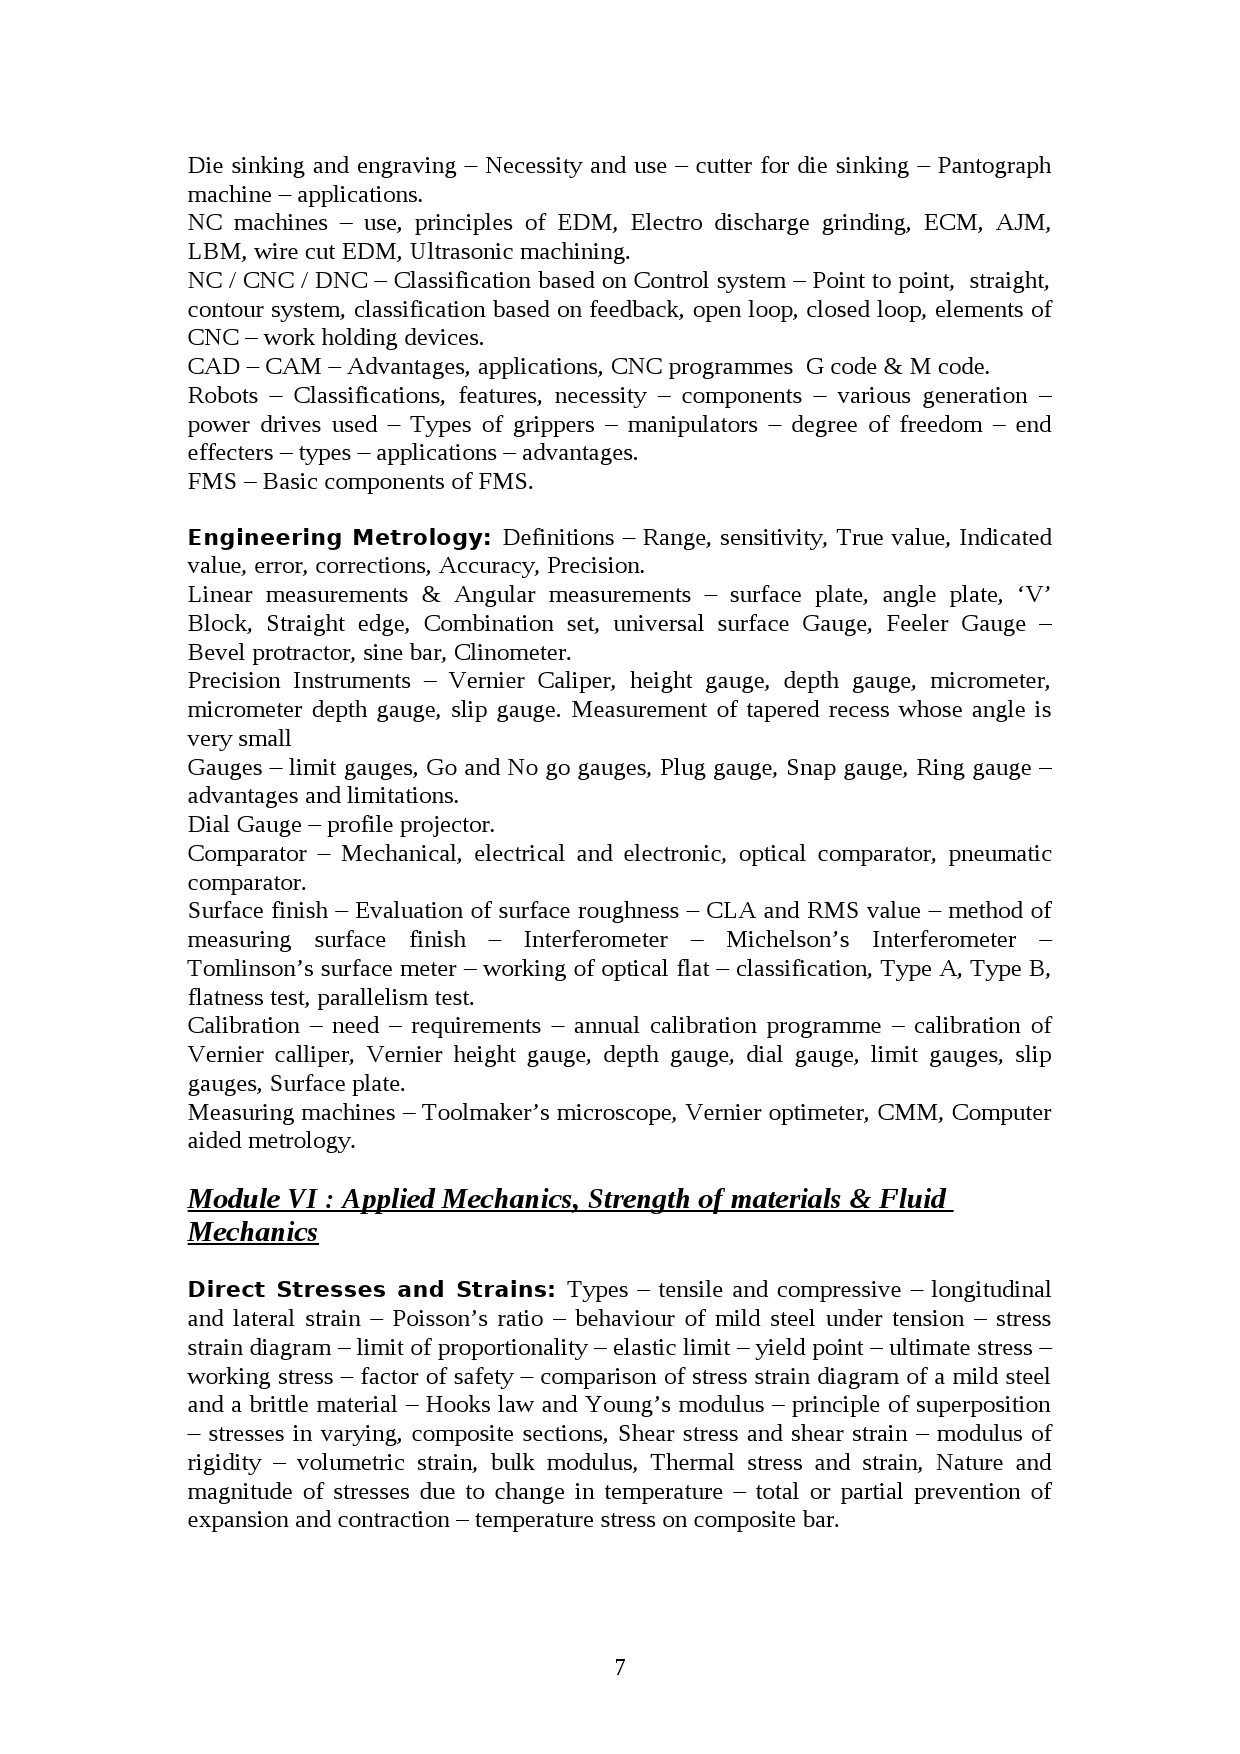 Tool And Die Engineering Lecturer in Polytechnic Exam Syllabus - Notification Image 7